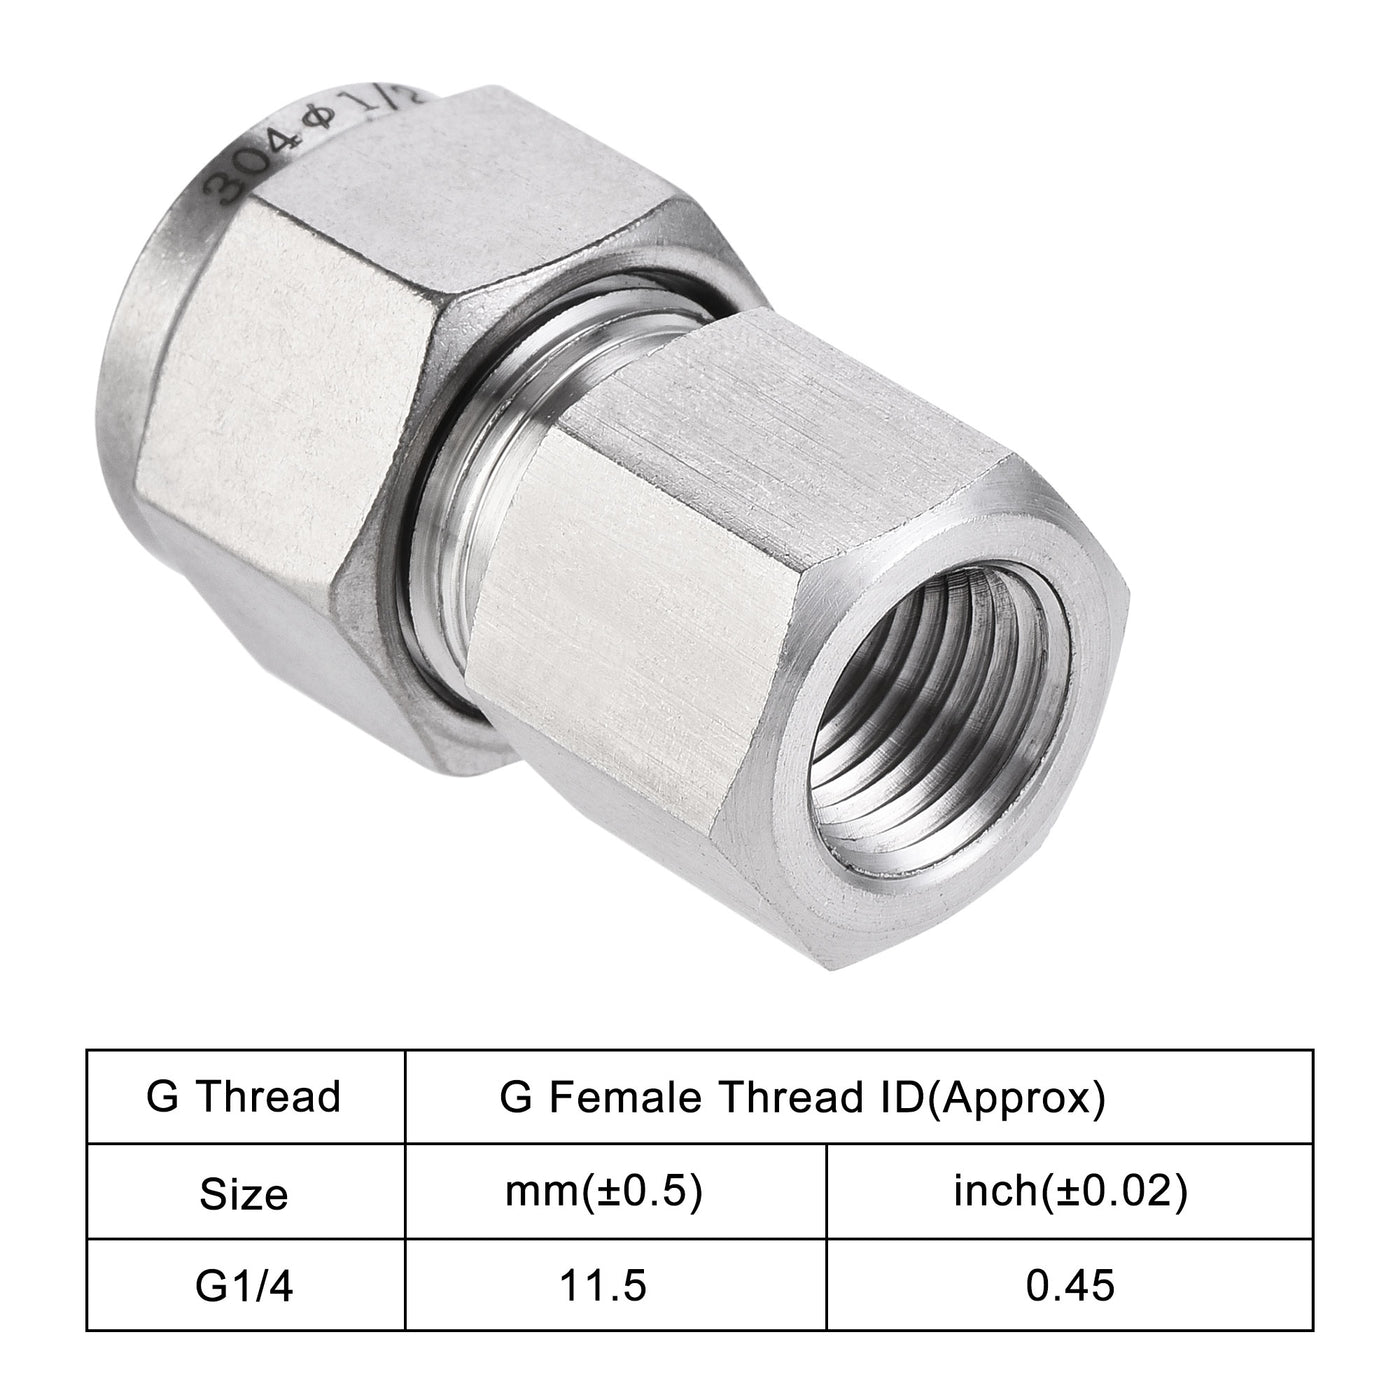 Uxcell Uxcell Compression Tube Fitting G1/2 Female Thread x 1/2" Tube OD Straight Coupling Adapter 304 Stainless Steel